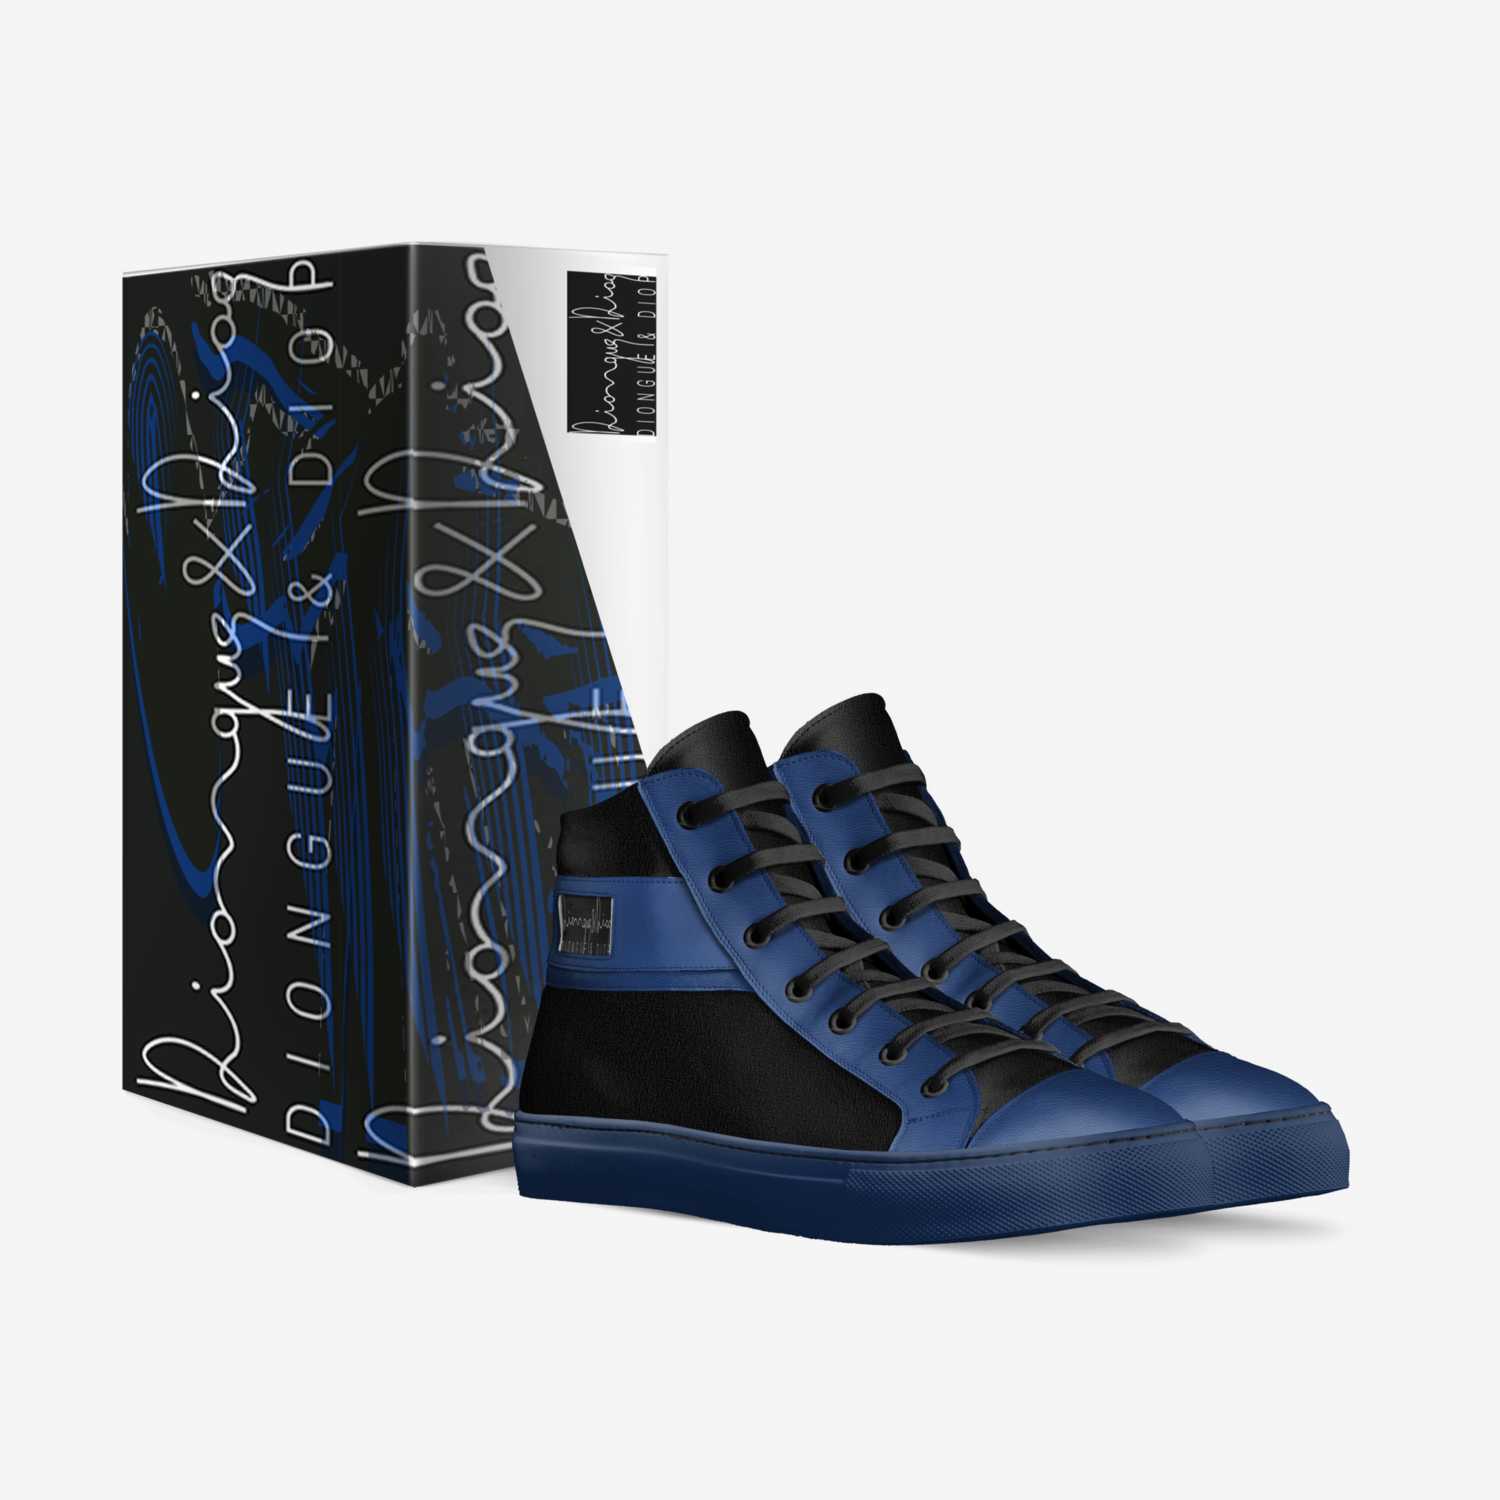 Diongue&Diop custom made in Italy shoes by Papa Diongue | Box view